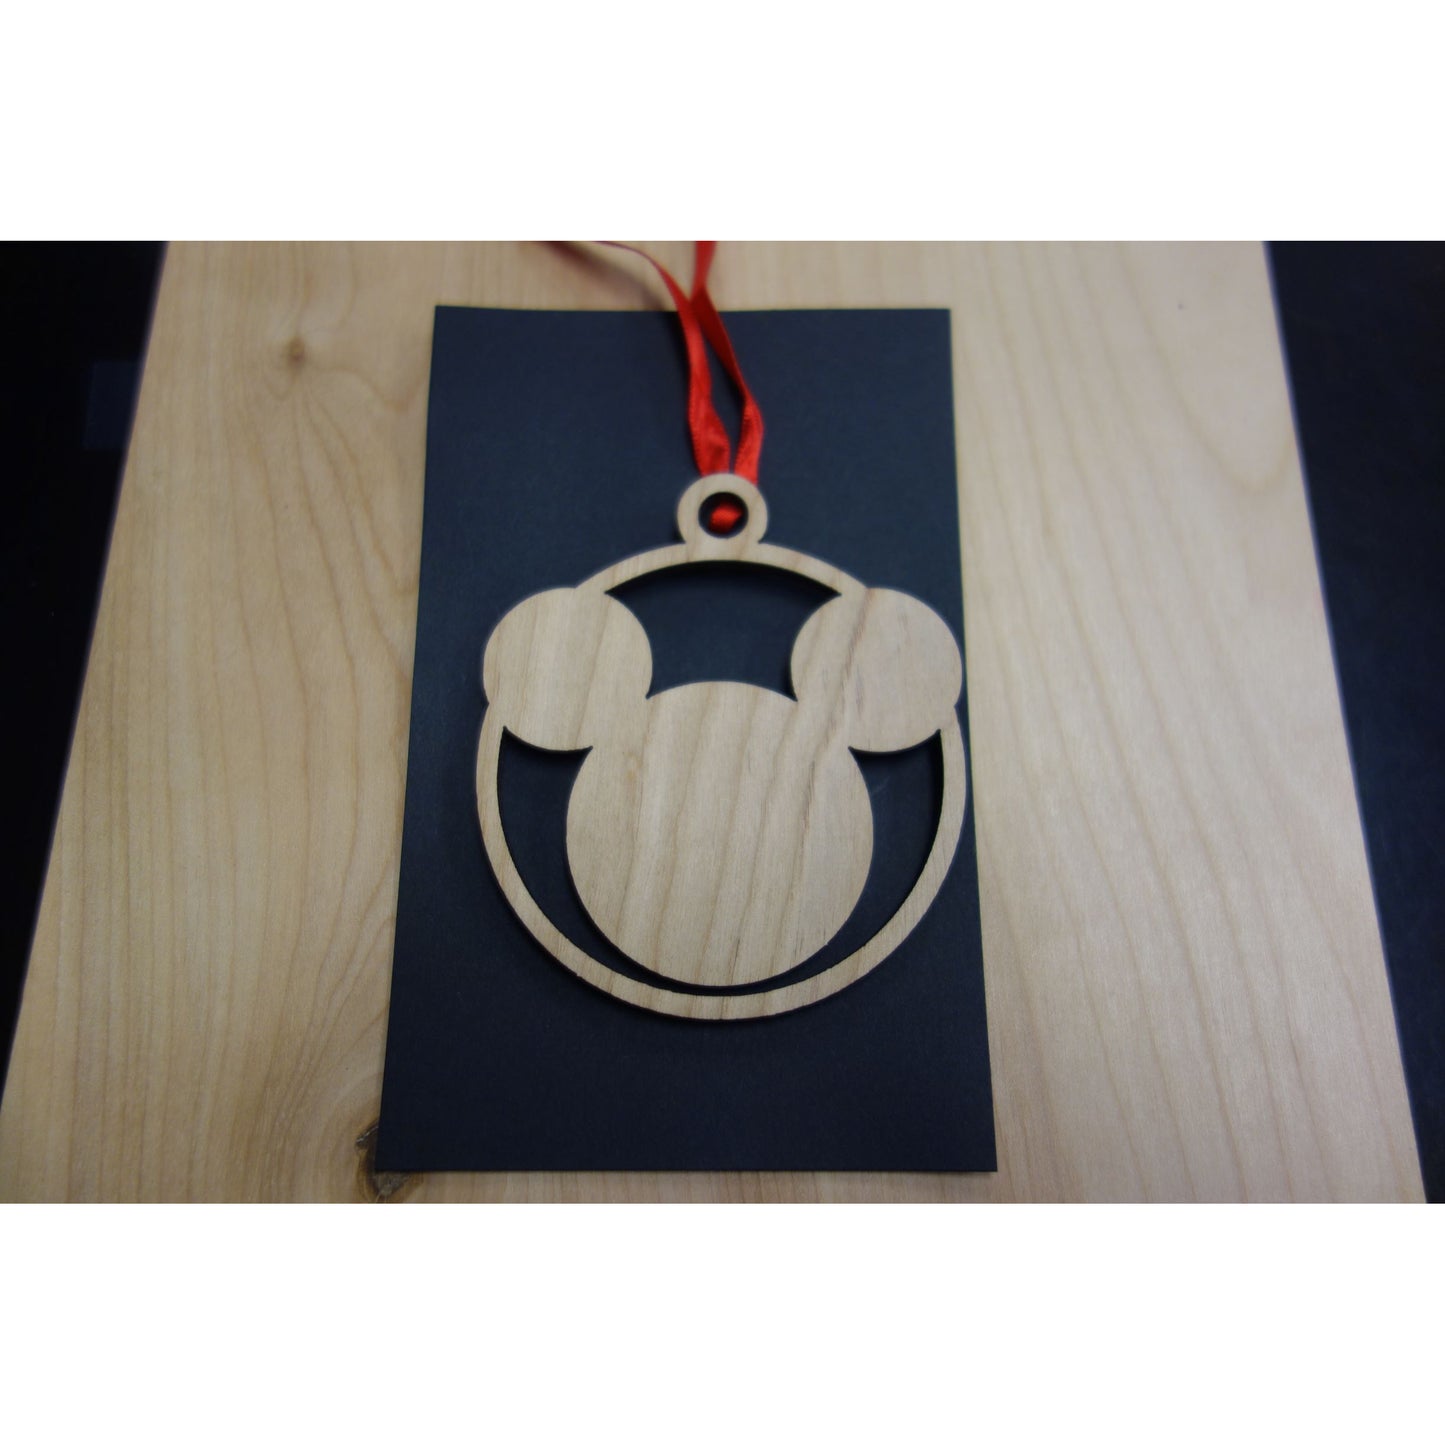 *CUSTOM ORDER* Mickey Mouse Inspired Ornament